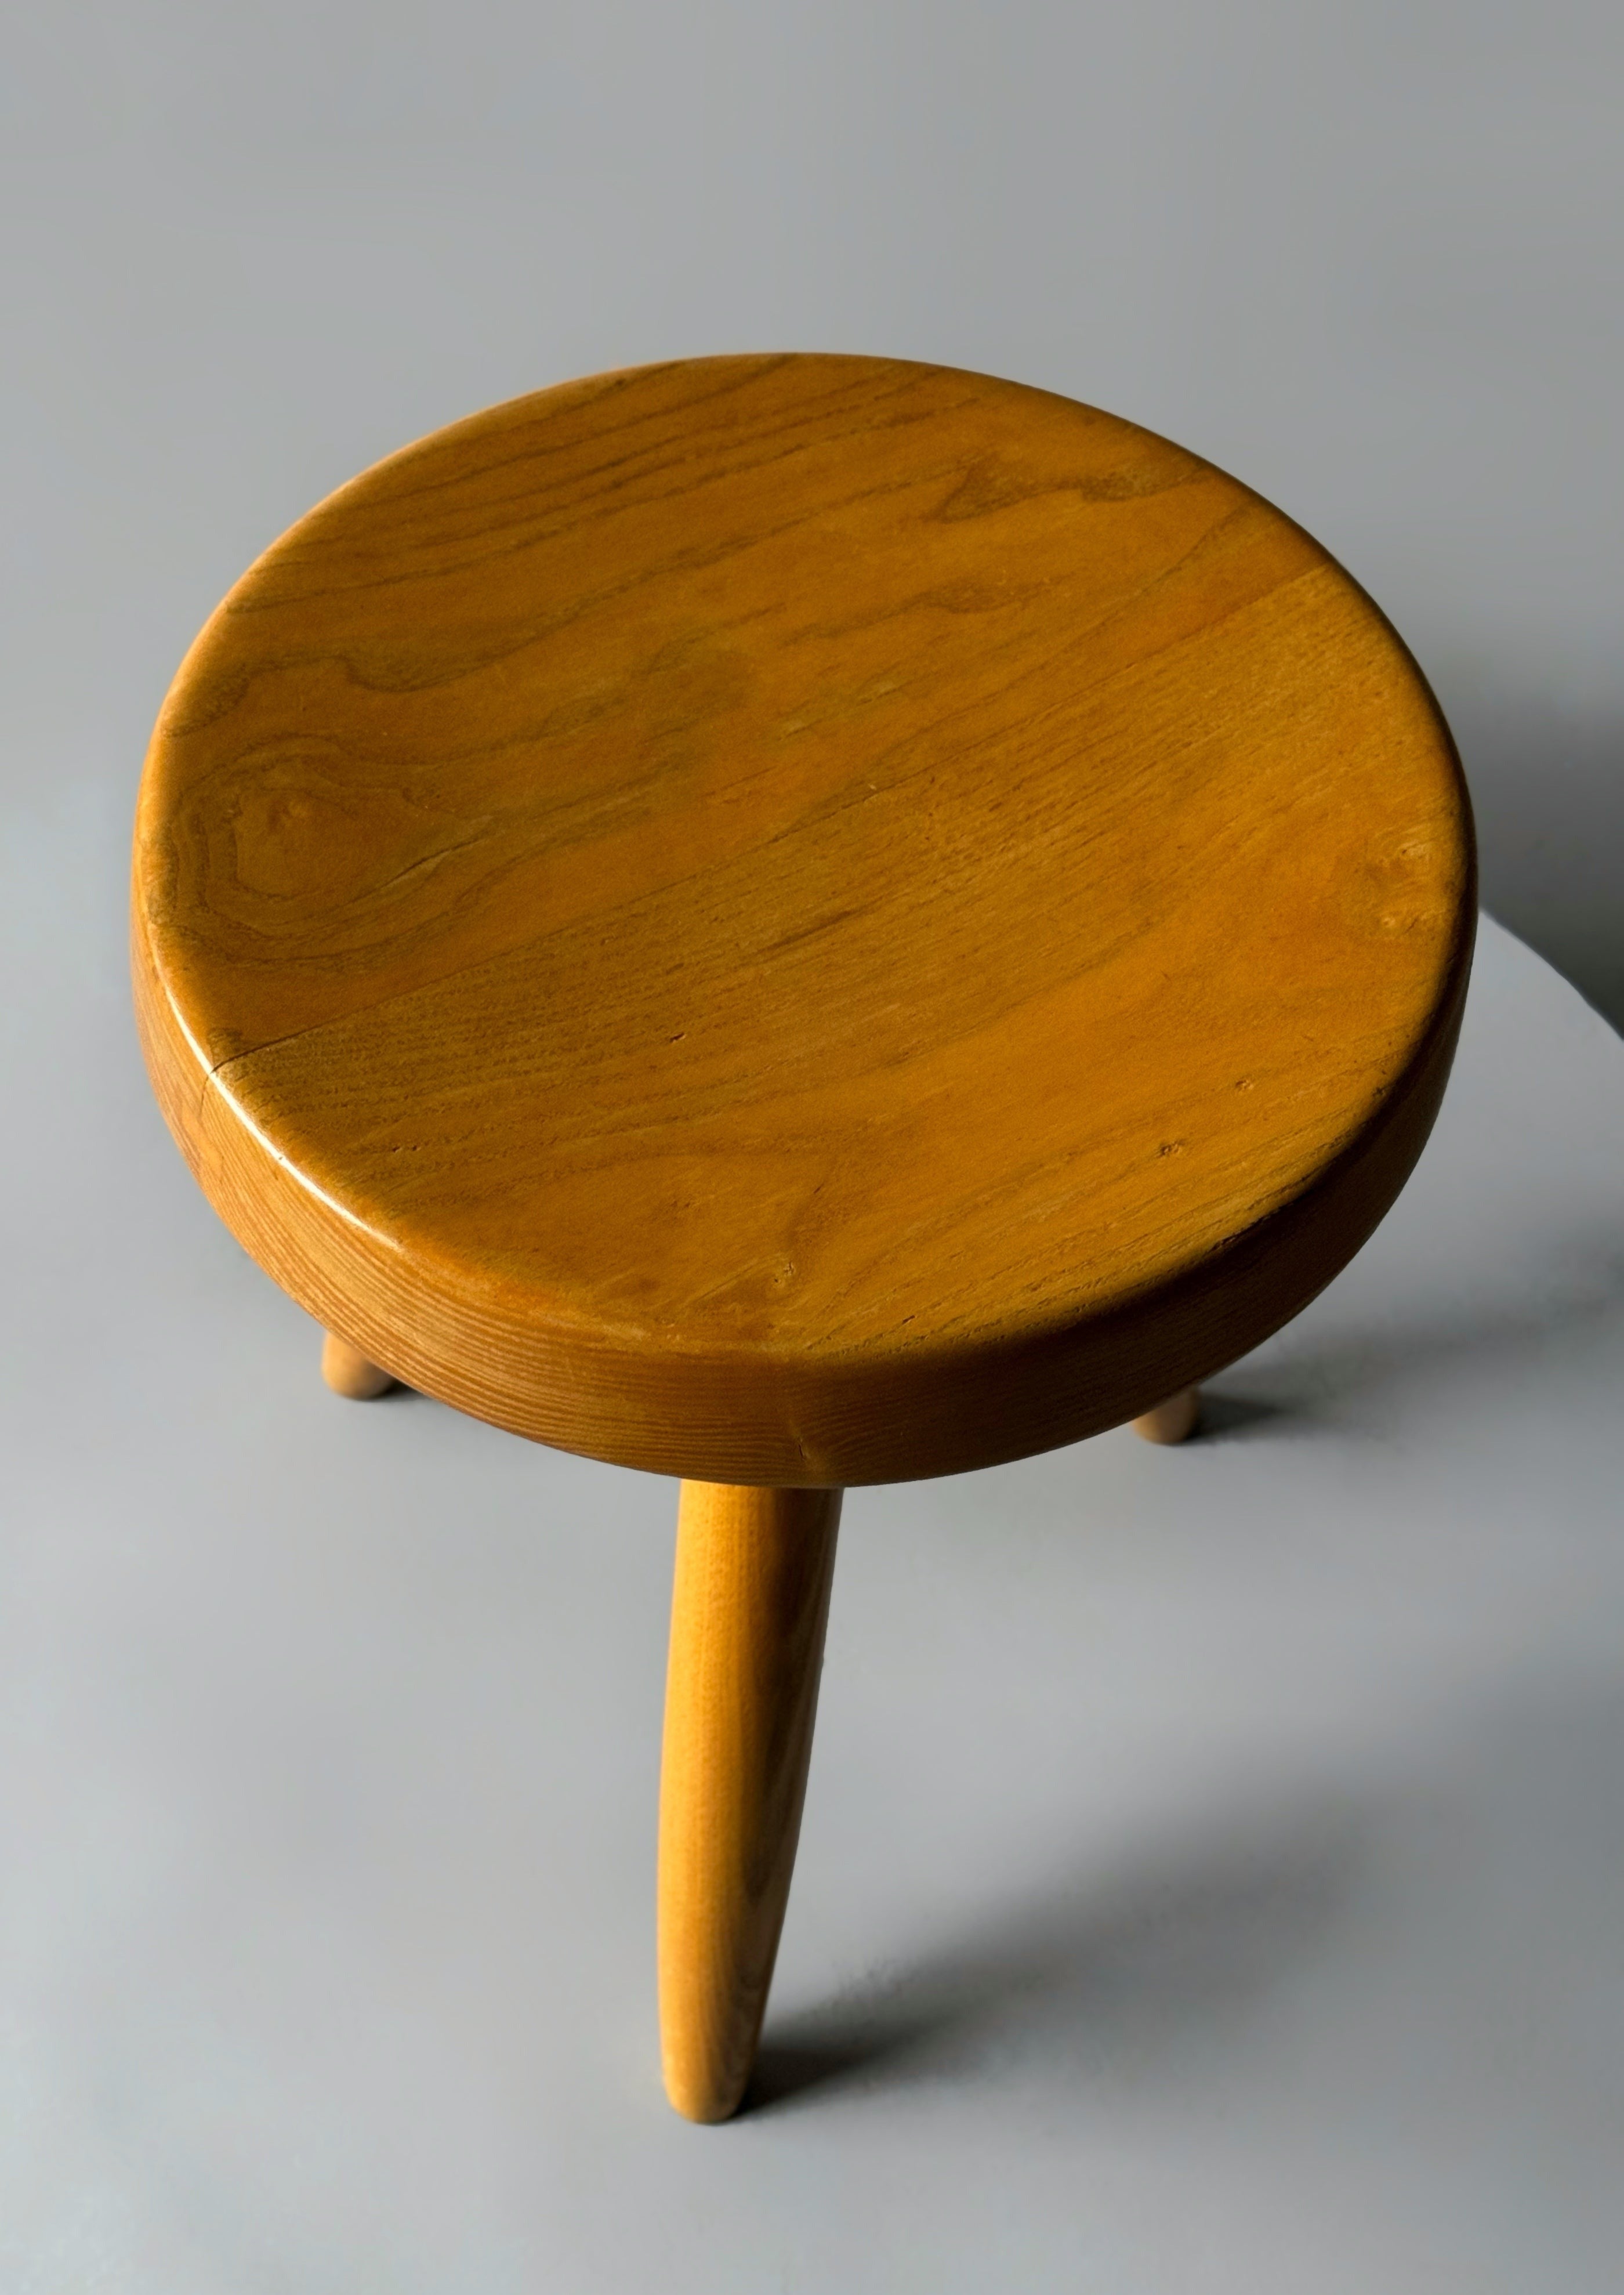 High Berger stool Designed by Charlotte Perriand